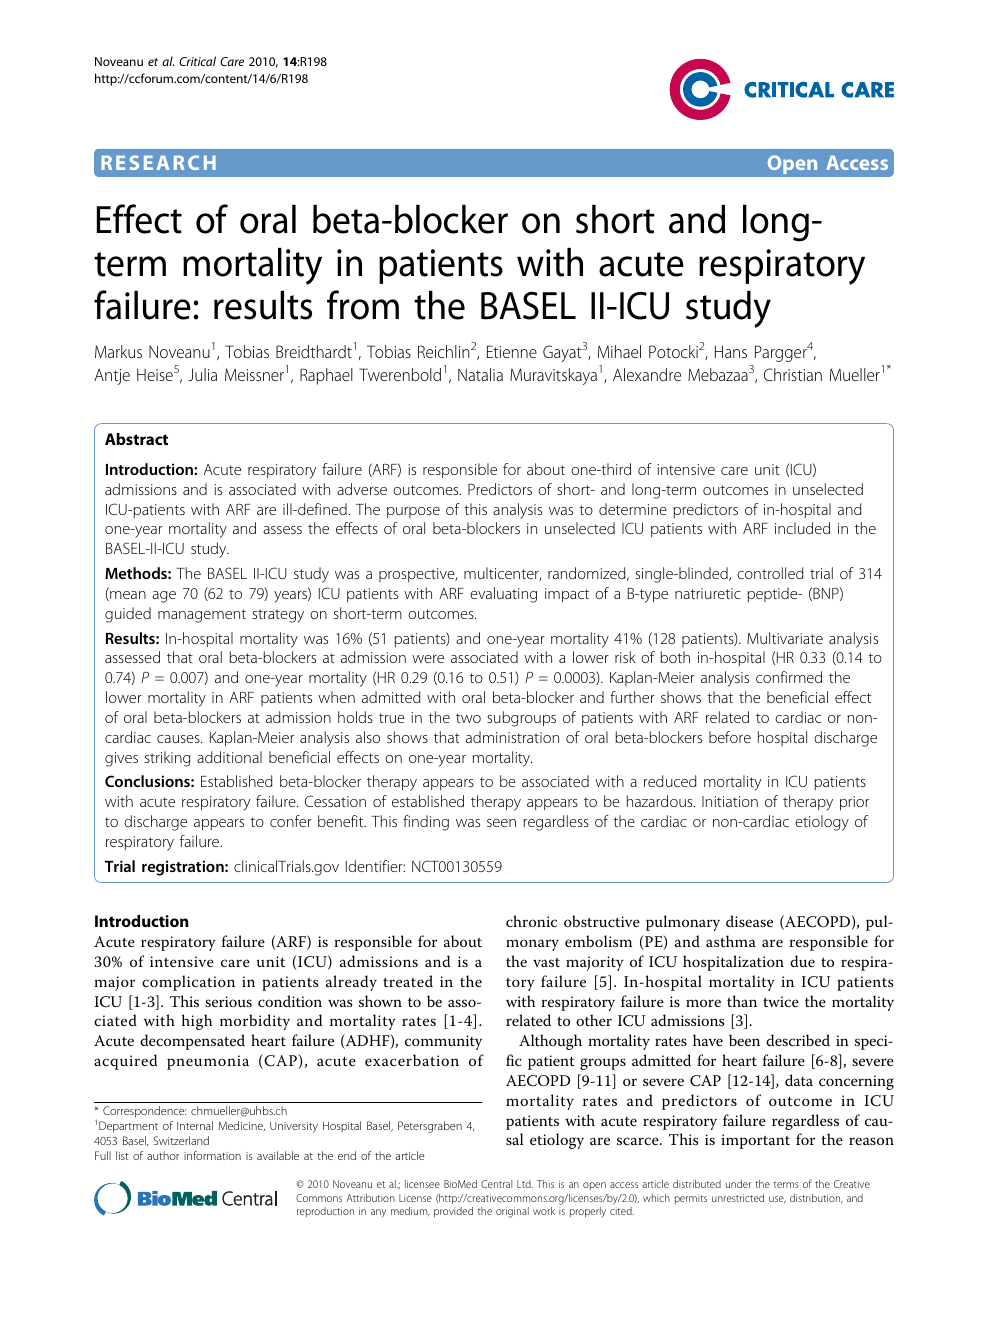 Effect Of Oral Beta Blocker On Short And Long Term Mortality In Patients With Acute Respiratory Failure Results From The Basel Ii Icu Study Topic Of Research Paper In Health Sciences Download Scholarly Article Pdf